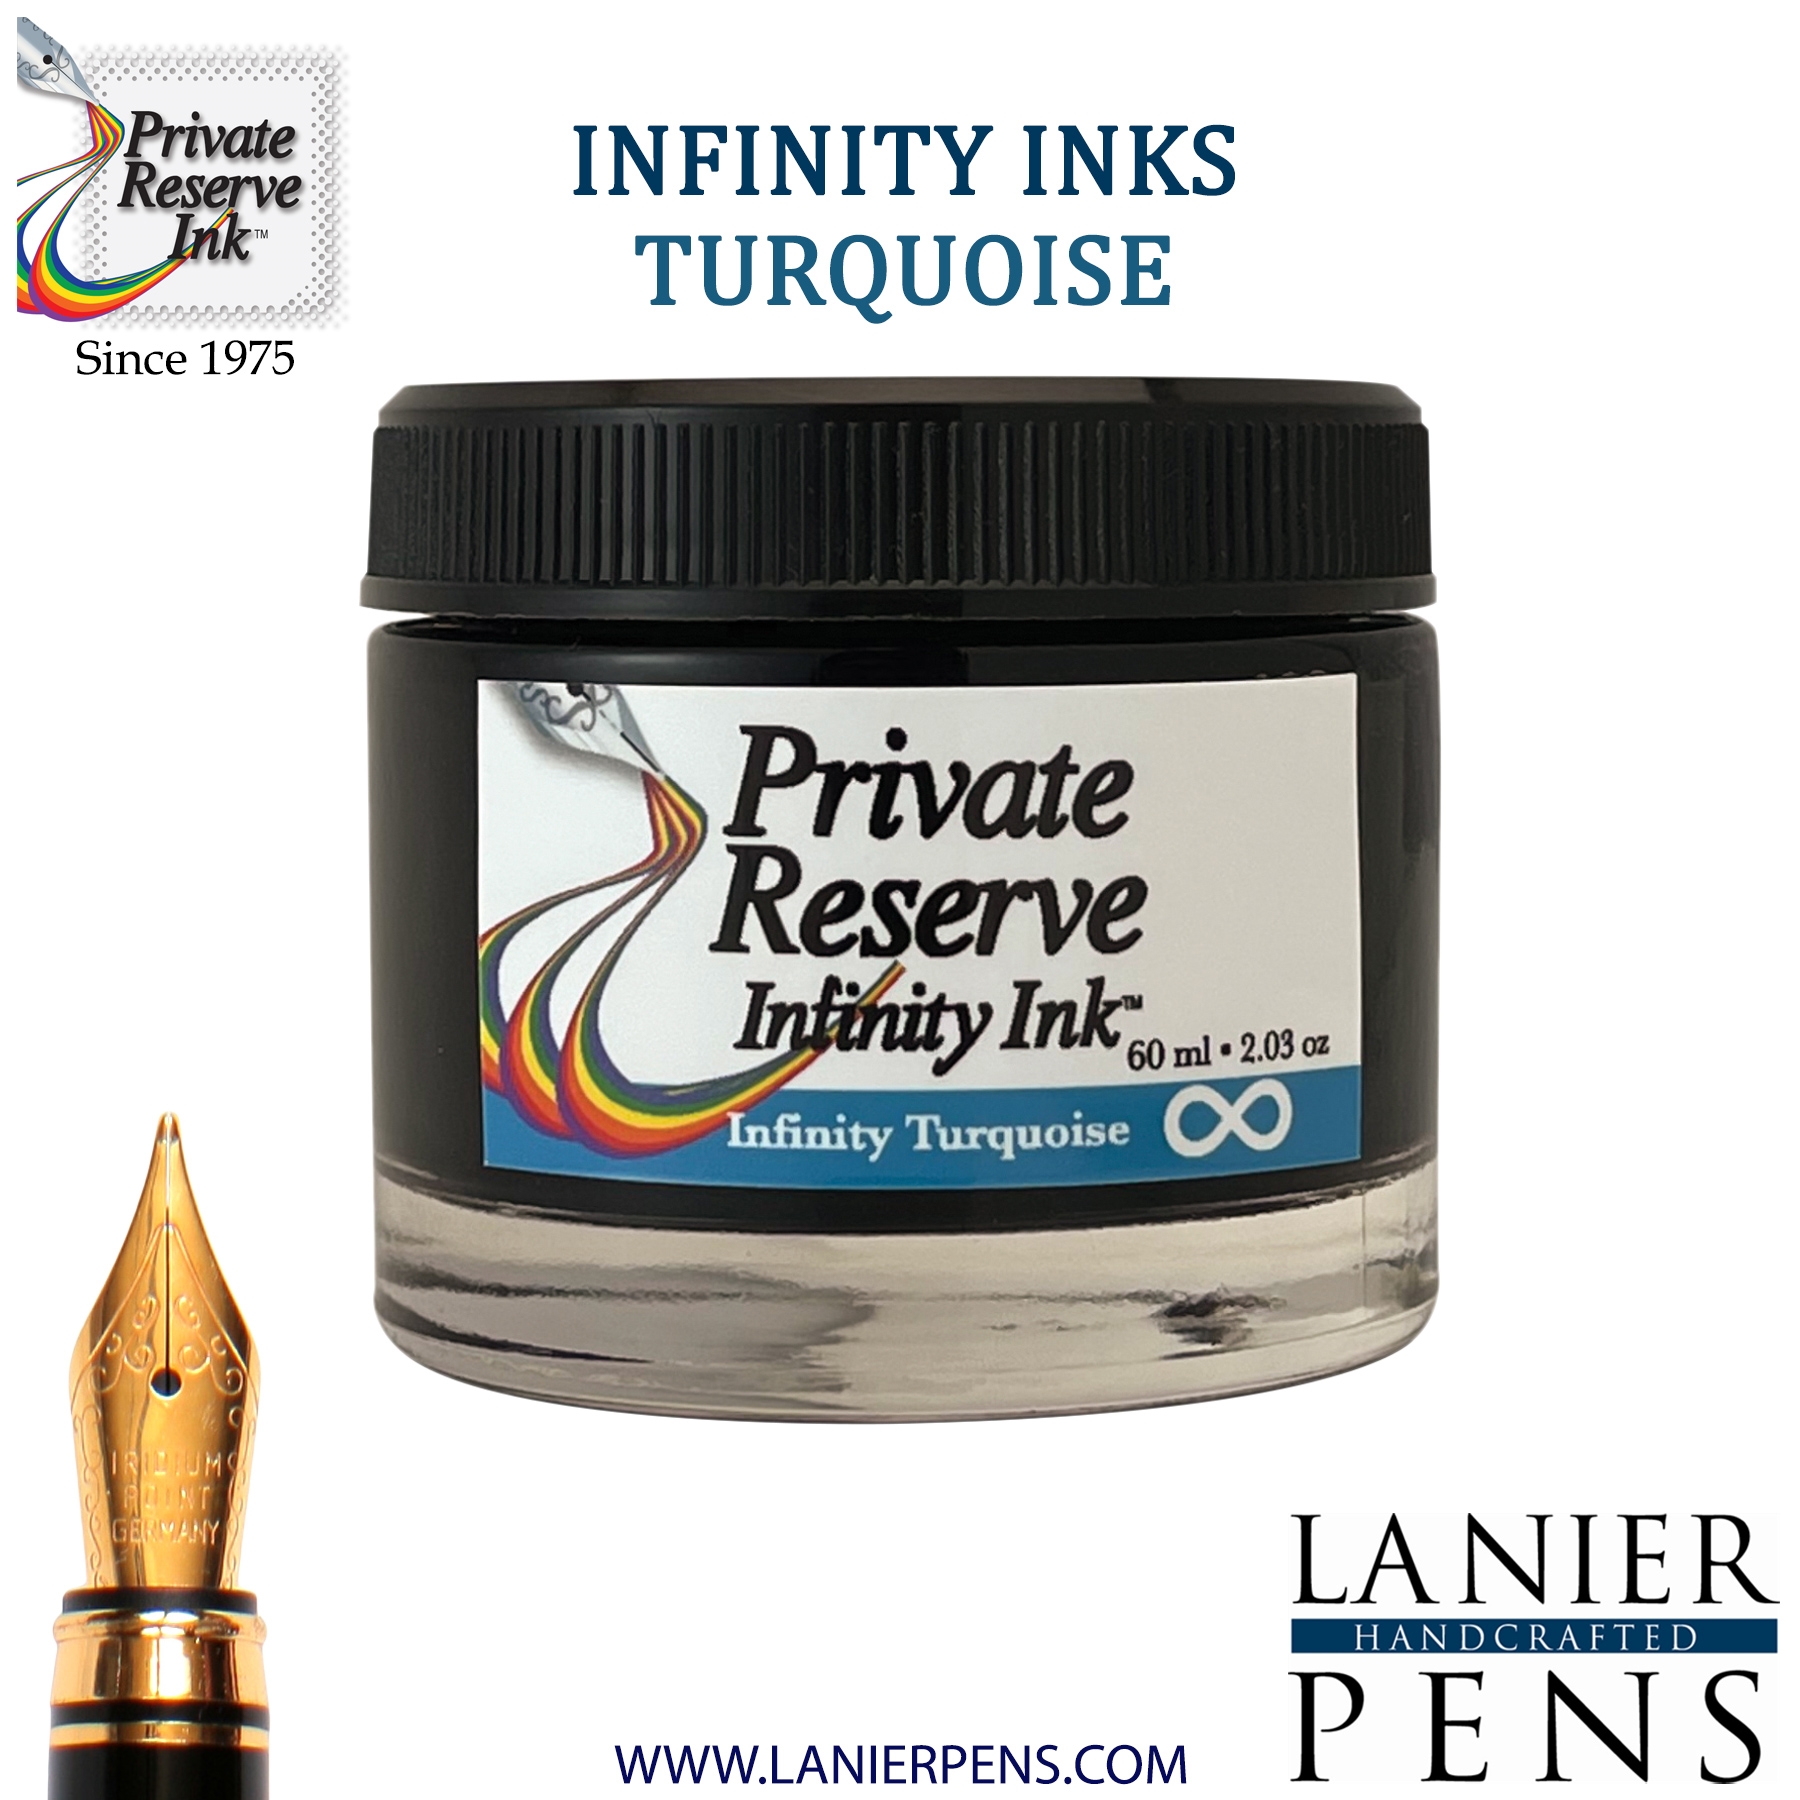 Private Reserve Ink Bottle 60ml - Infinity Turquoise (with E.C.O. formula), PR17055